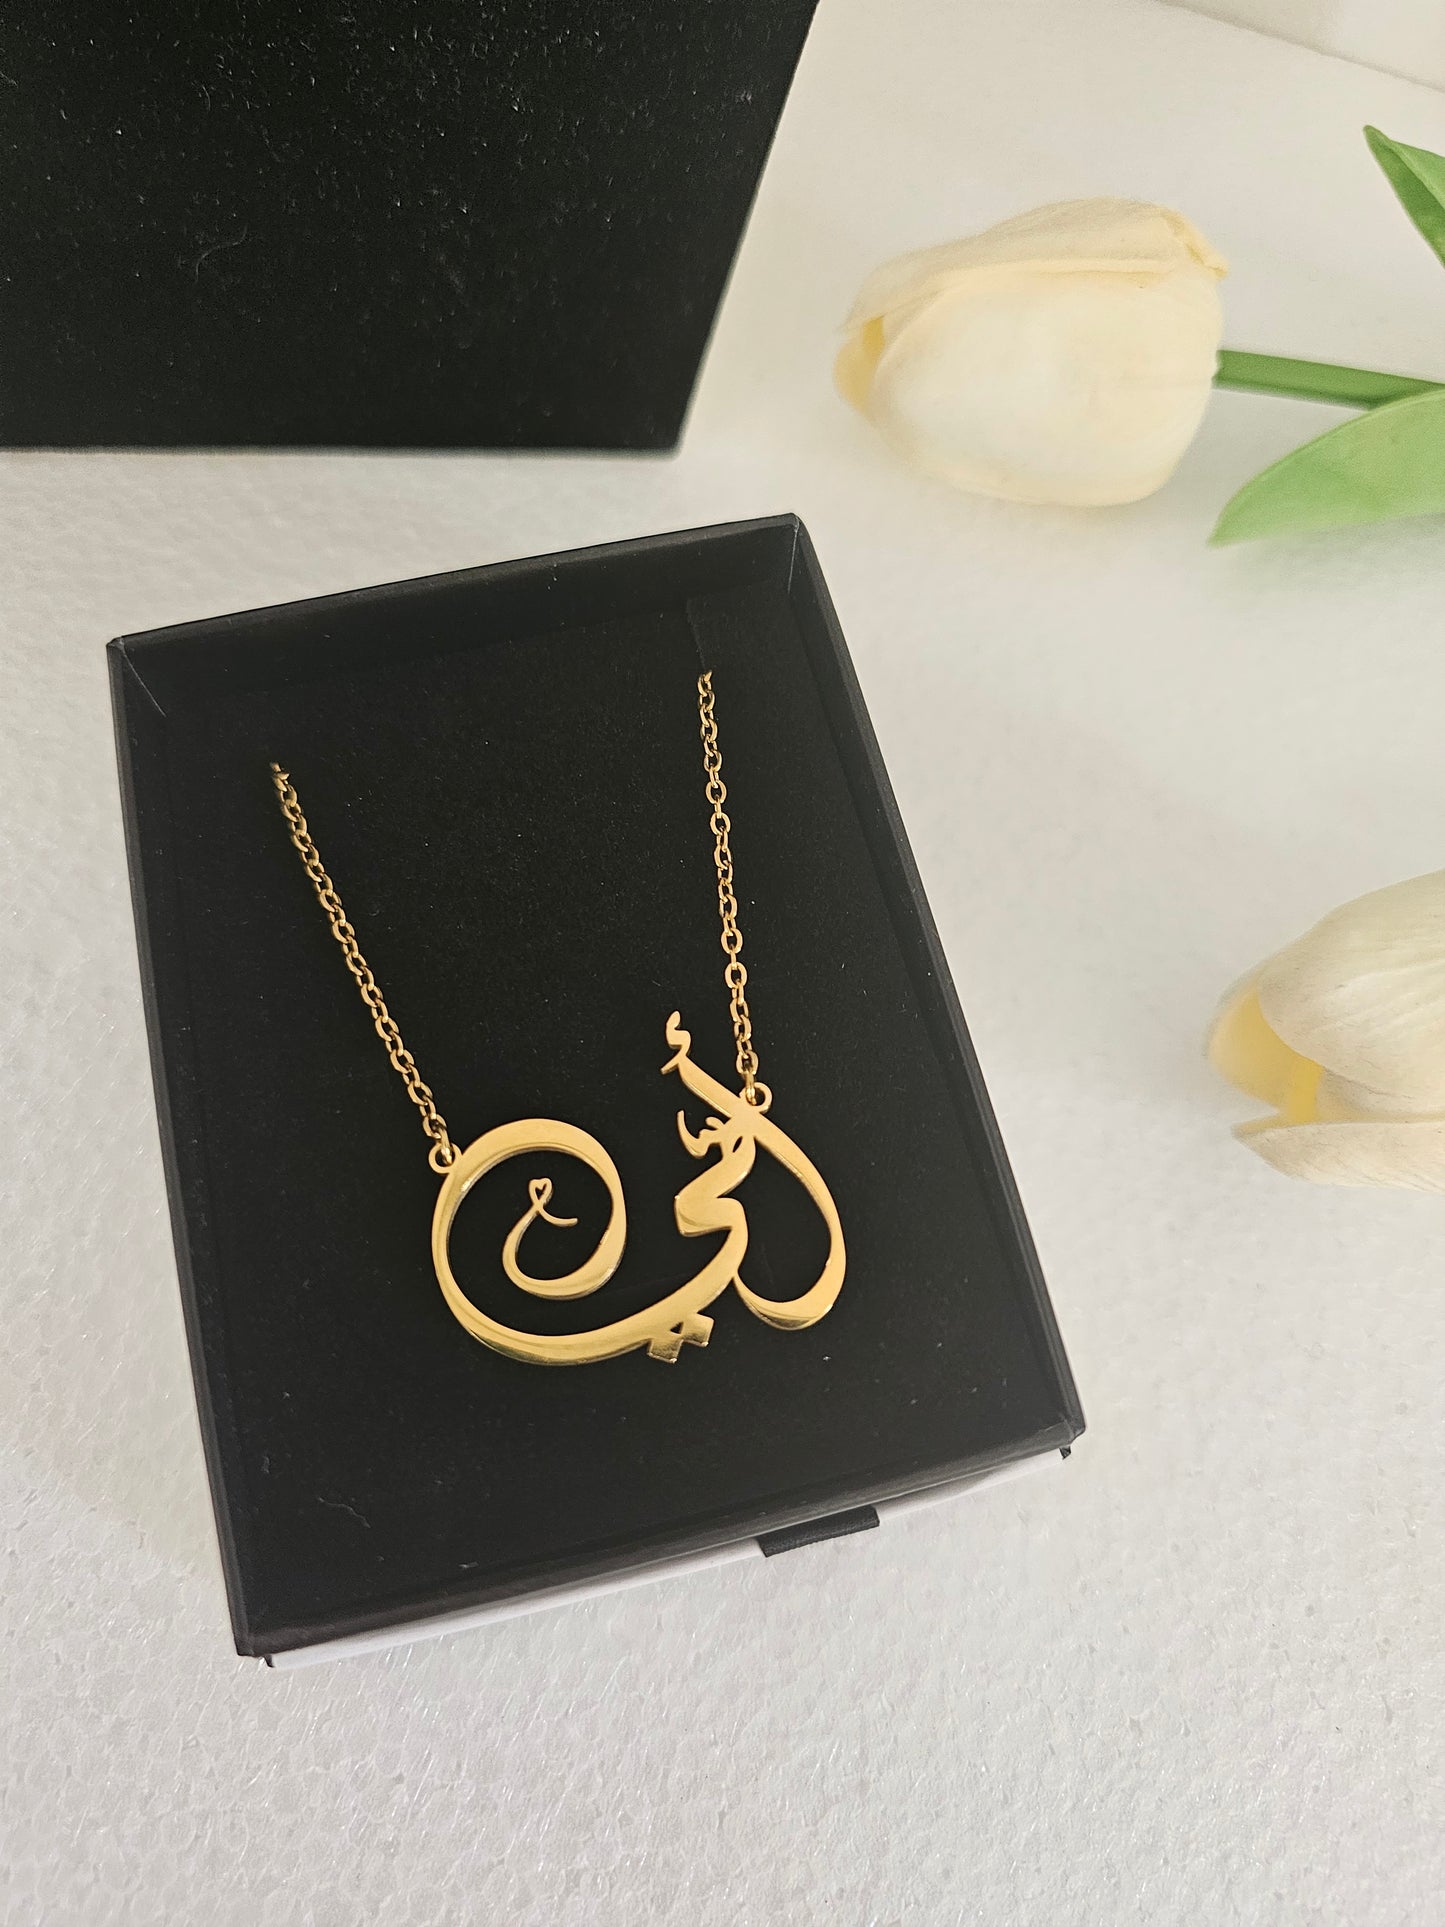 Ummi calligrapgy necklace